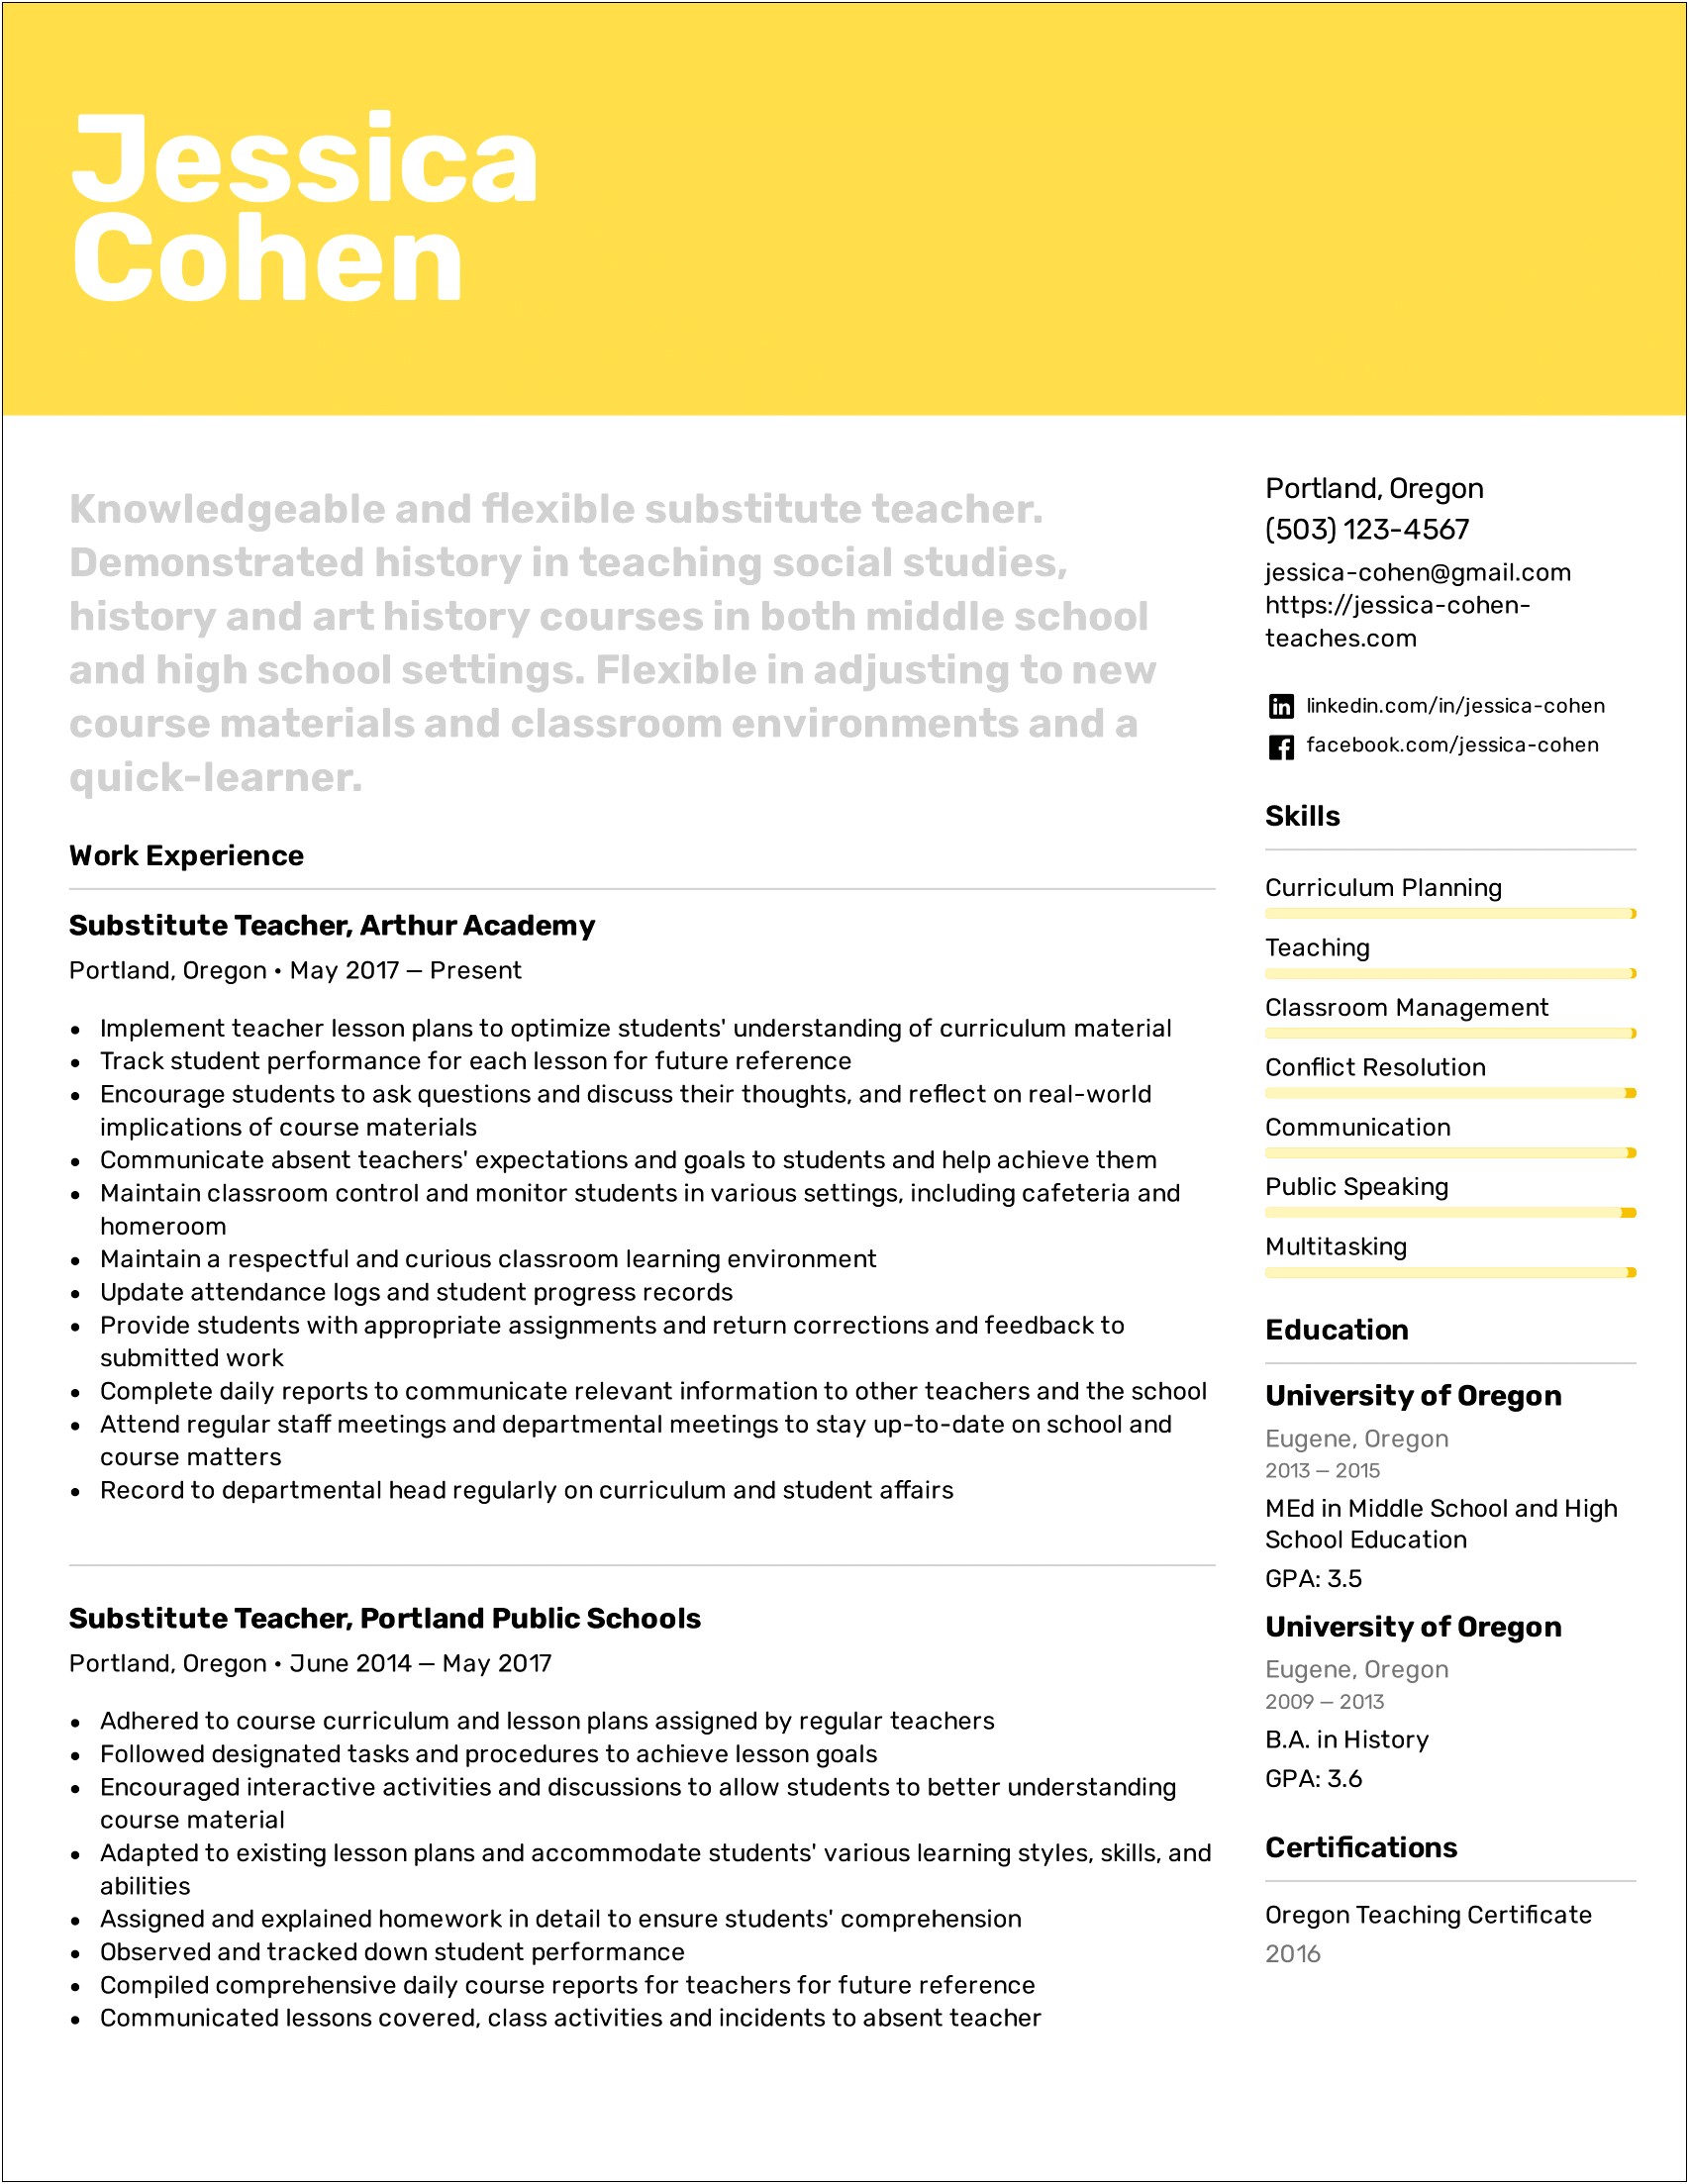 Sample Resume For A Teacher With Substitute